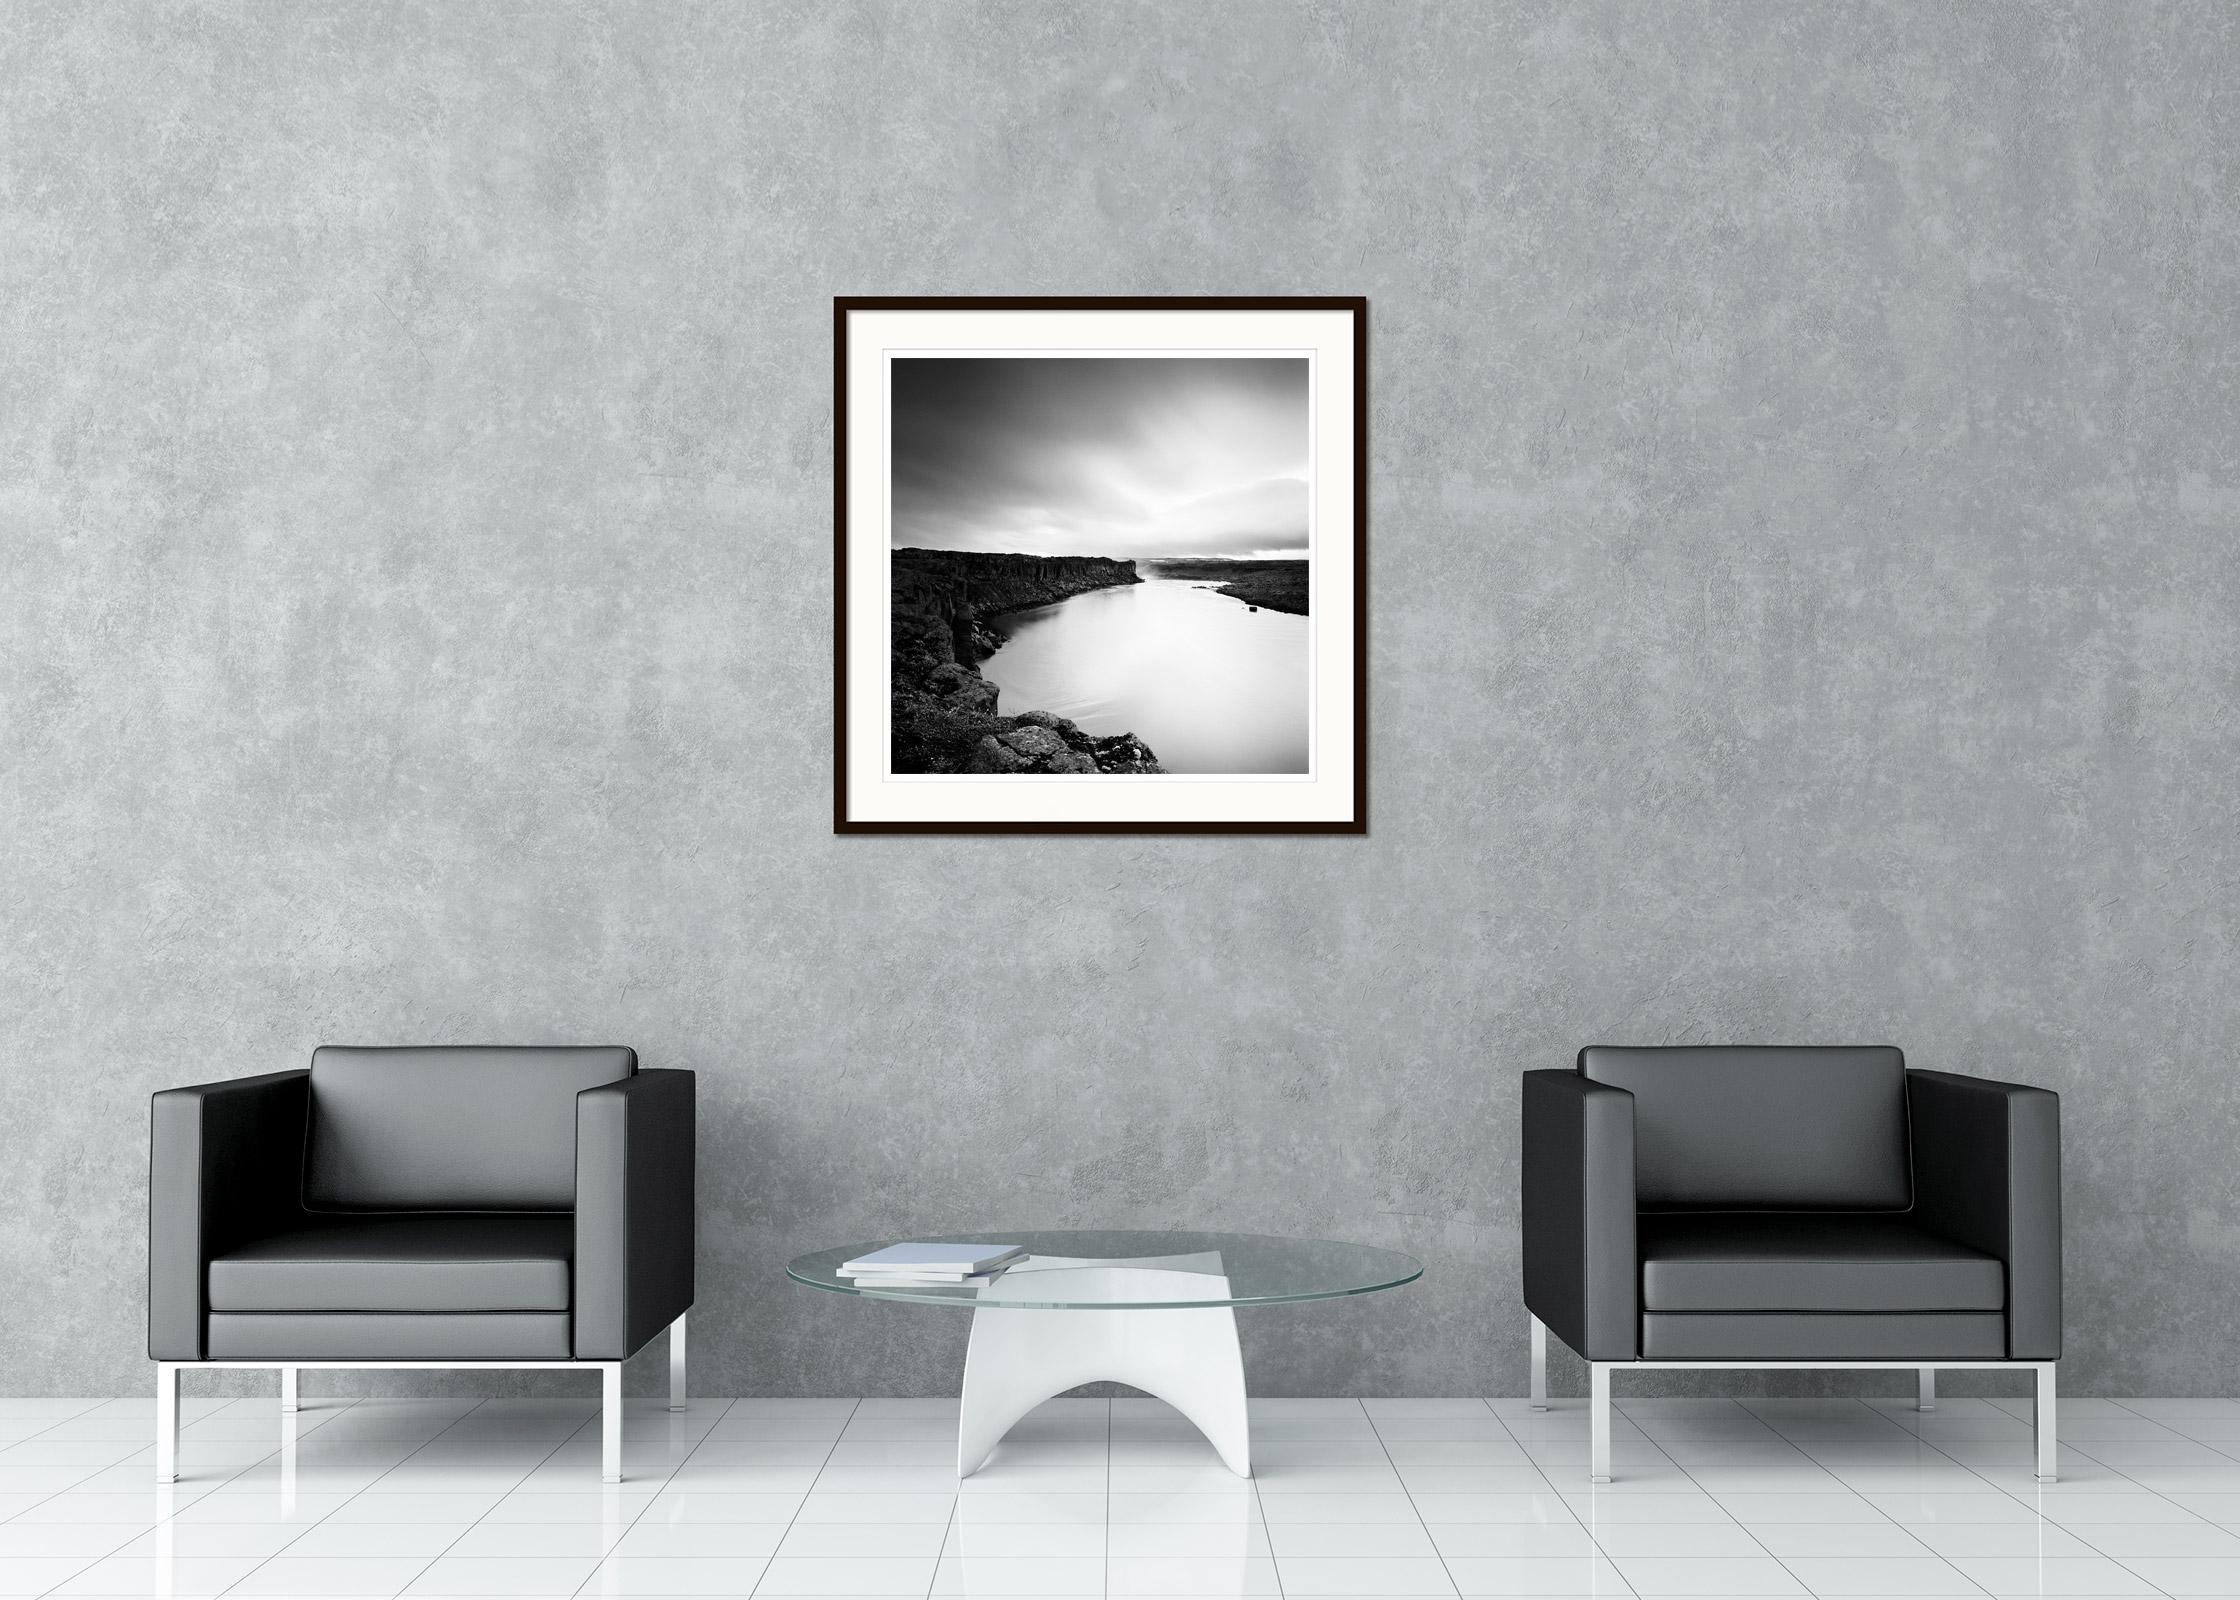 Gerald Berghammer - Limited edition of 9
Archival fine art pigment print. Signed, titled, dated and numbered by artist. Certificate of authenticity included. Printed with 4cm white border.
15.75 x 15.75 in. (40 x 40 cm) edition of 9
23.63 x 23.63